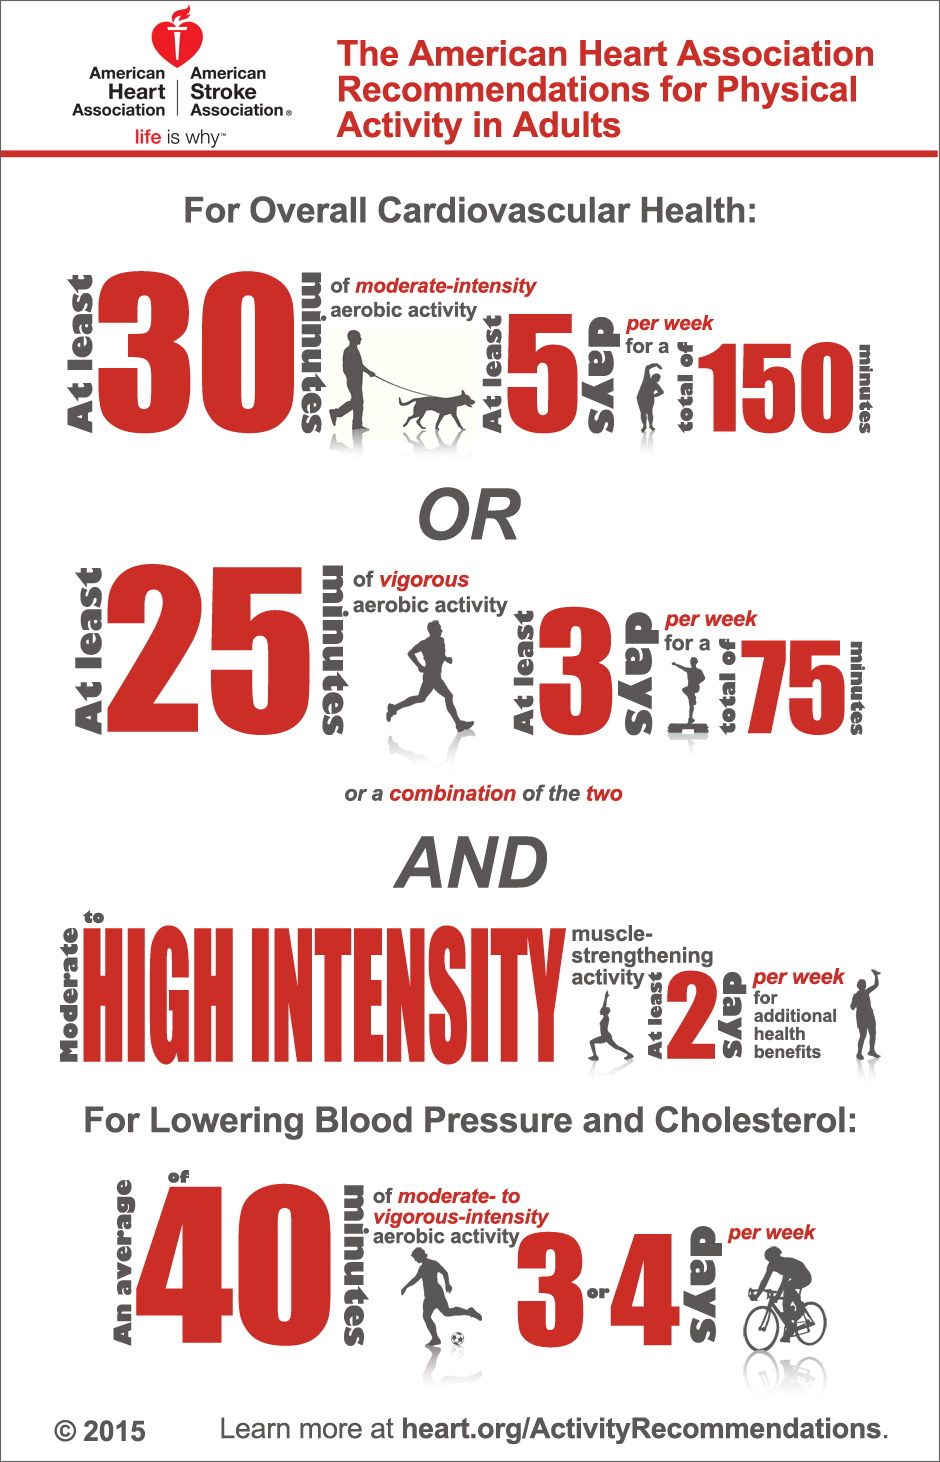 American Heart Association | To be a relentless force for a world of longer, healthier lives